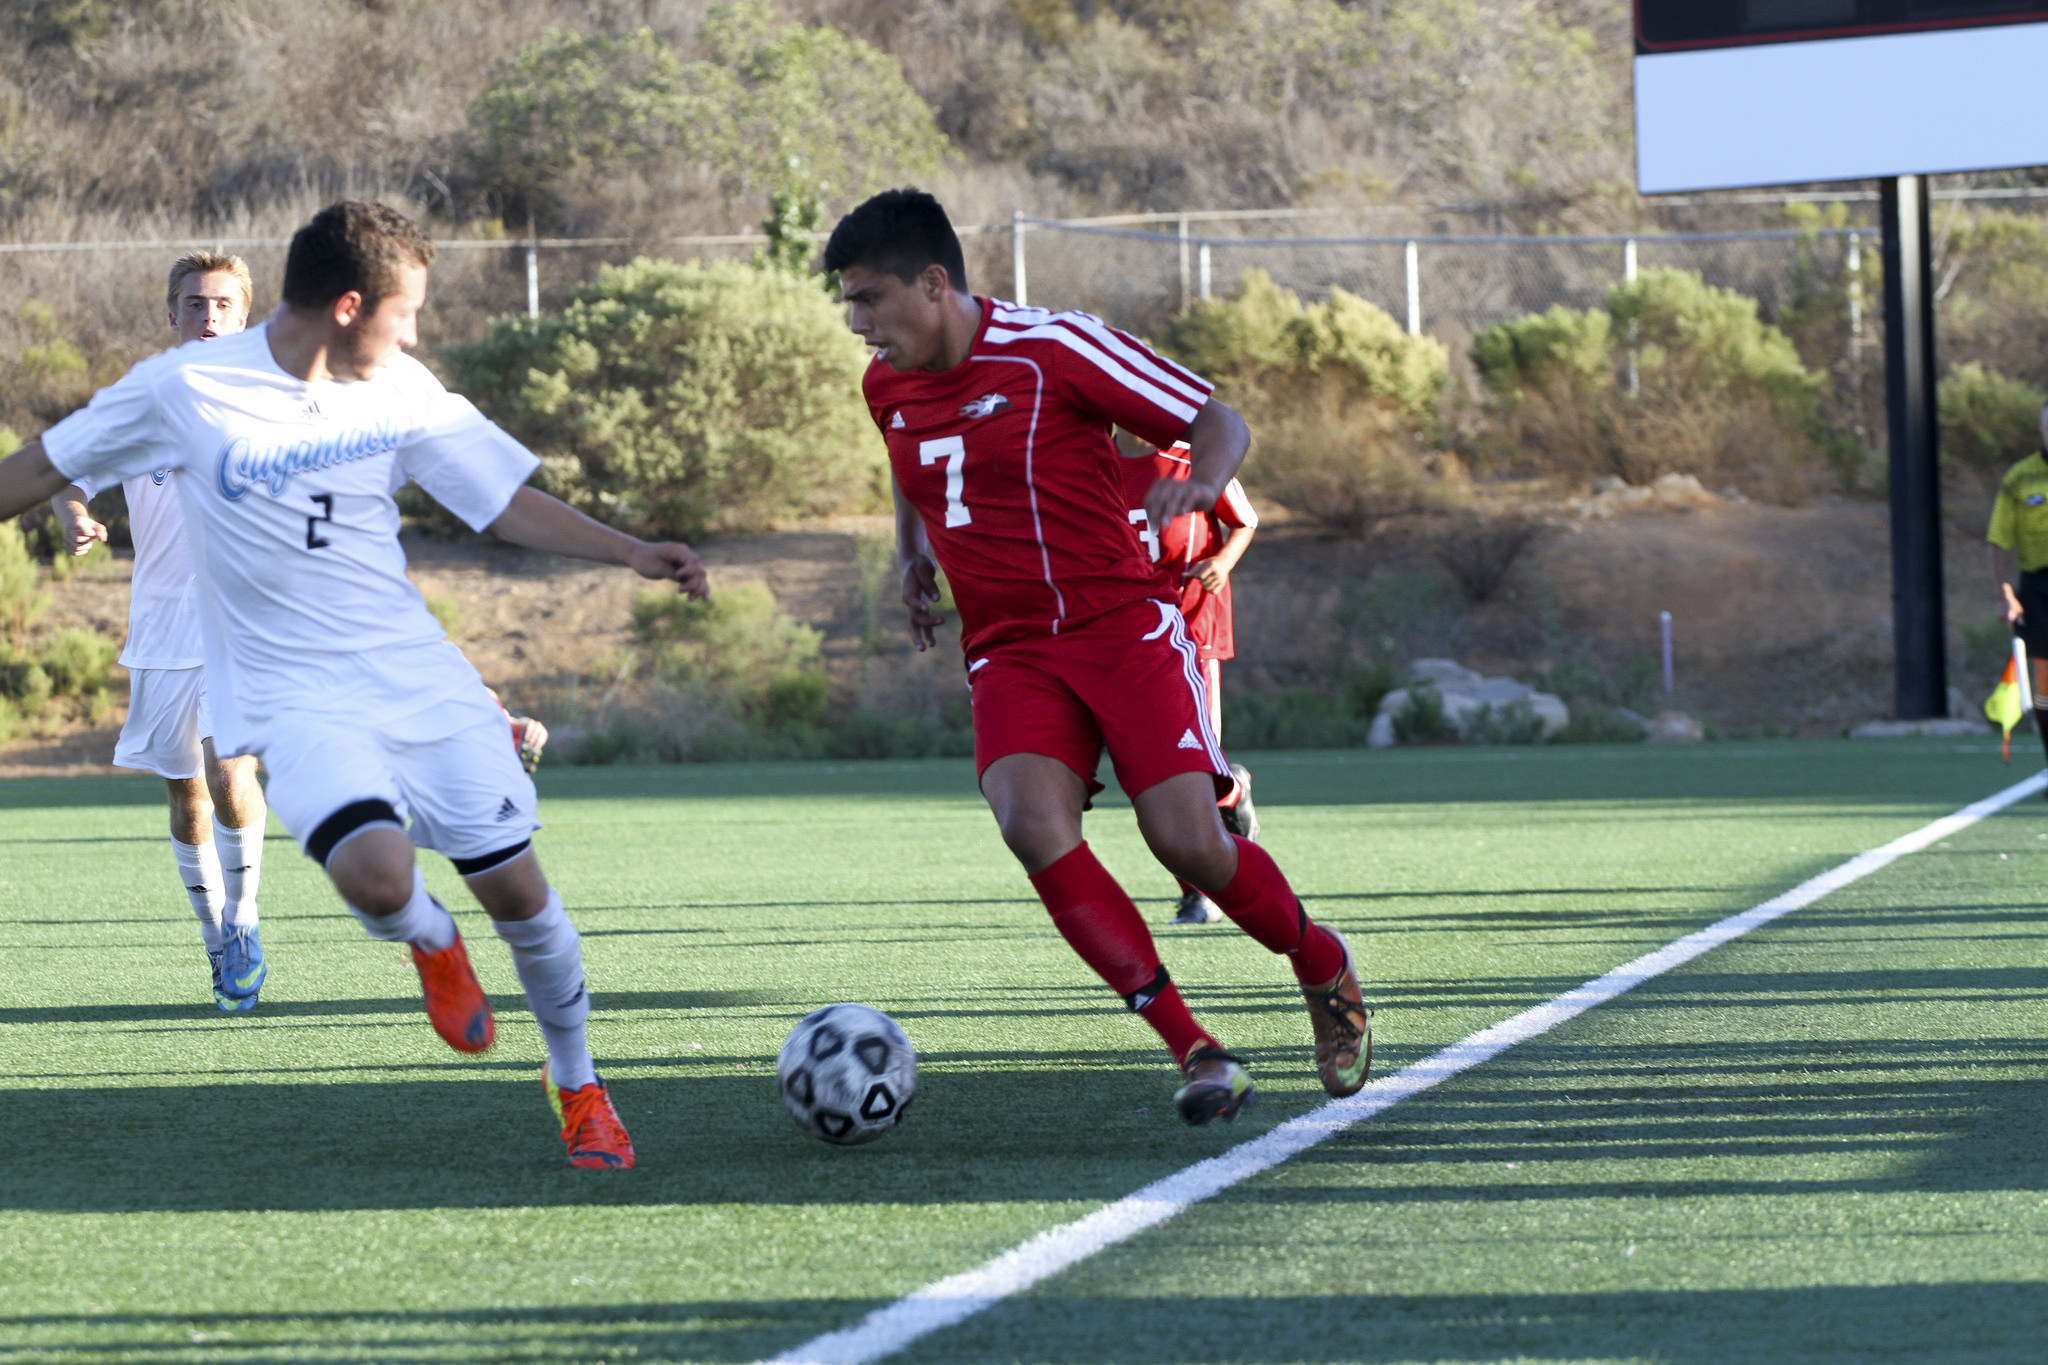 Palomar's midfielder Adrian Agraz (#7) battles for the ball during a game against Cuyamaca on Oct. 24, 2014 at Minkoff Field in San Marcos, Calif. Comets lost to Cuyamaca 2-0. (Photo courtesy of Marcela Alauie)